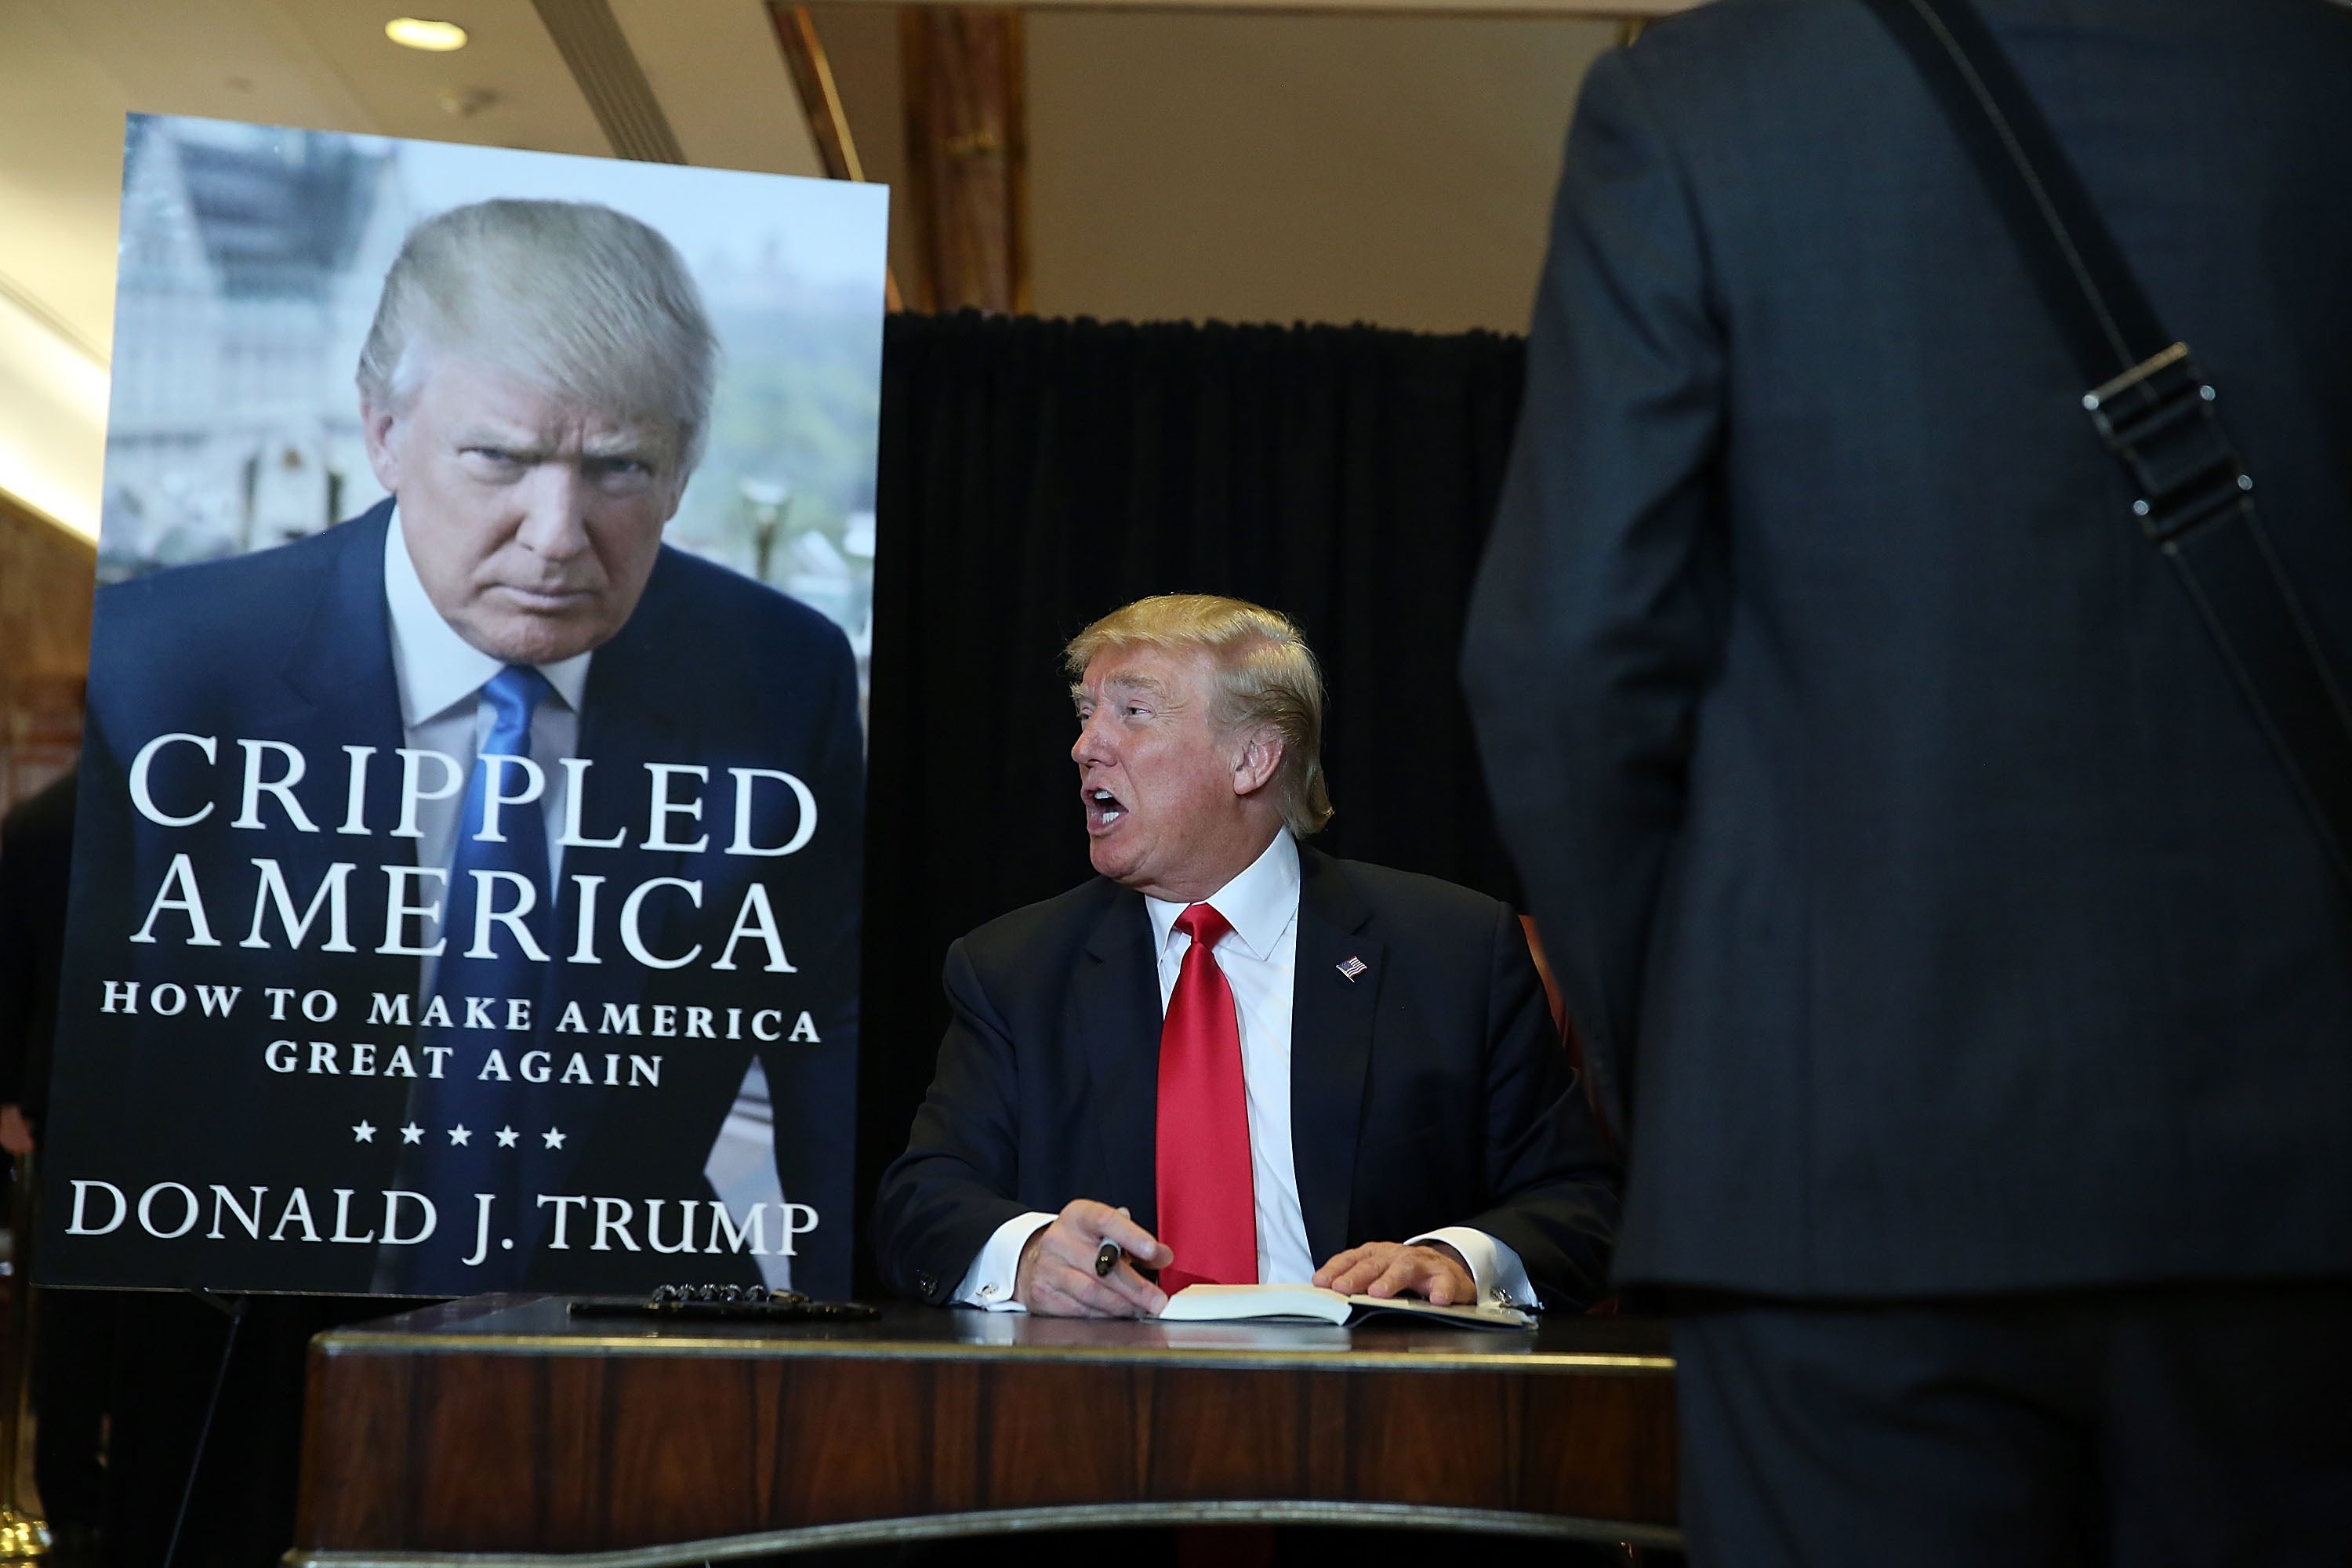 Donald Trump signs copies of his book “Crippled America: How to Make America Great Again” in 2015